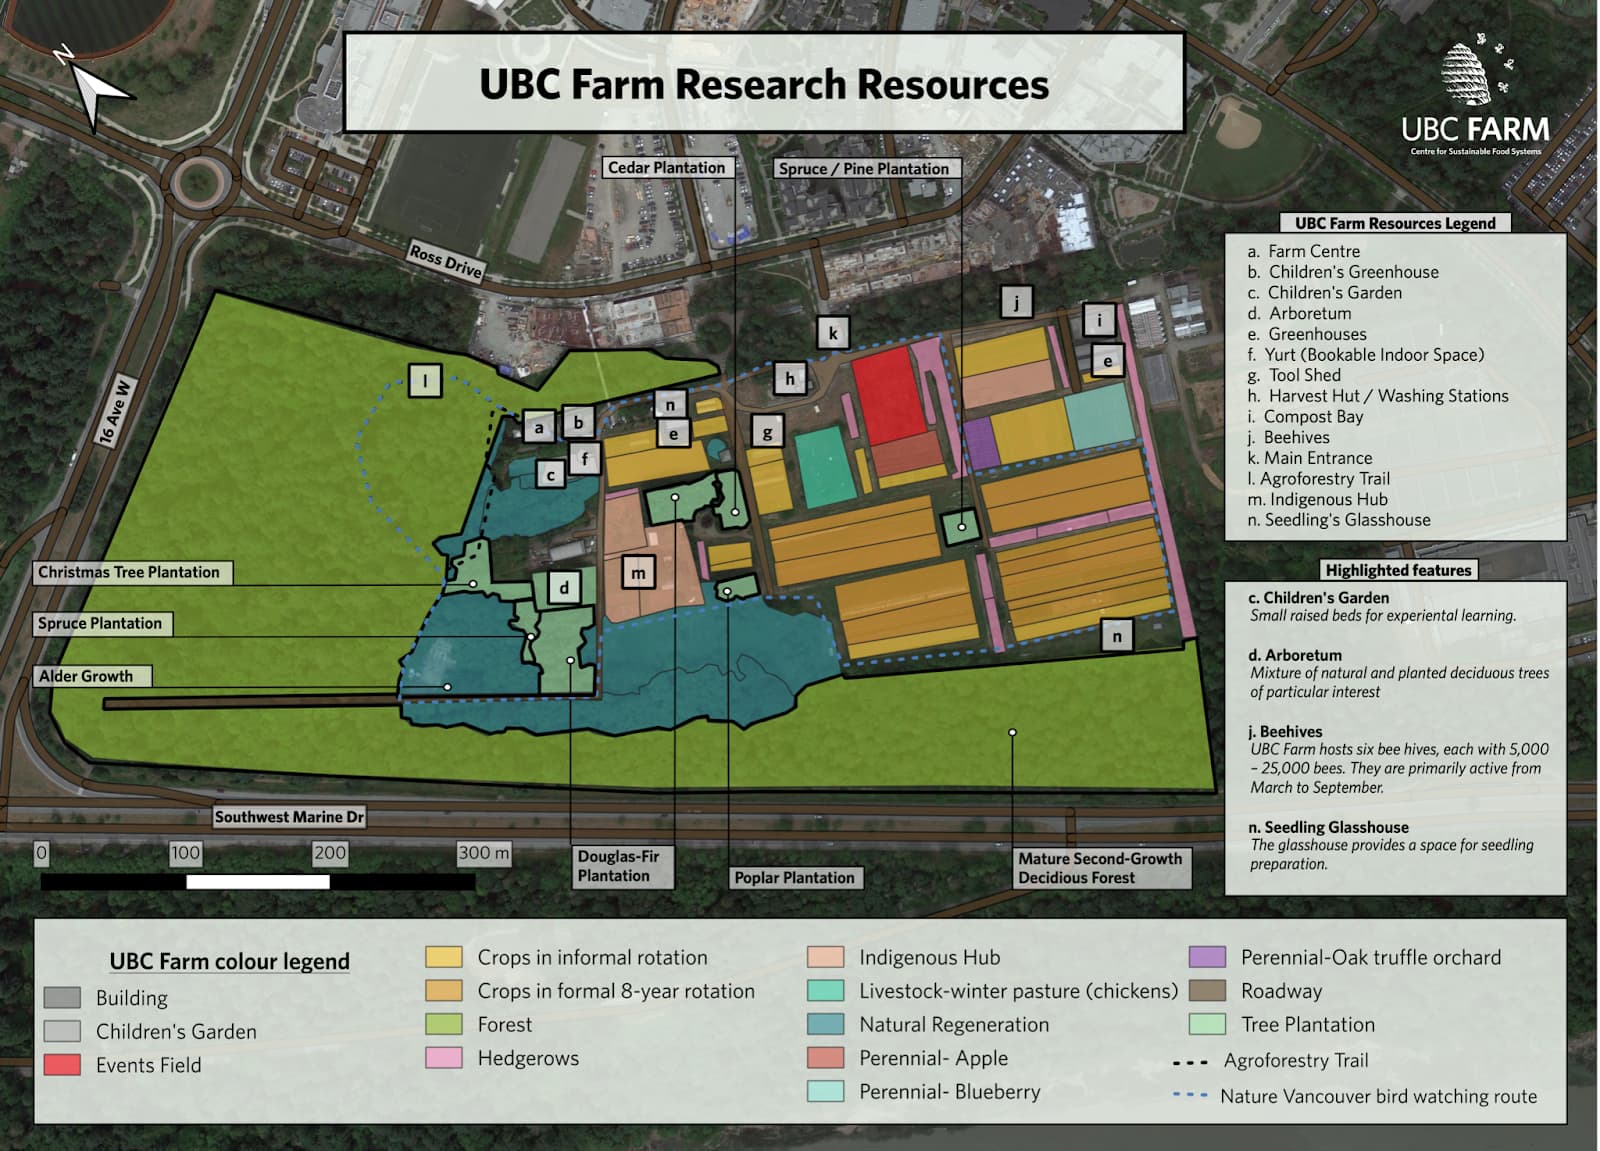 The UBC Farm Research Resources Map